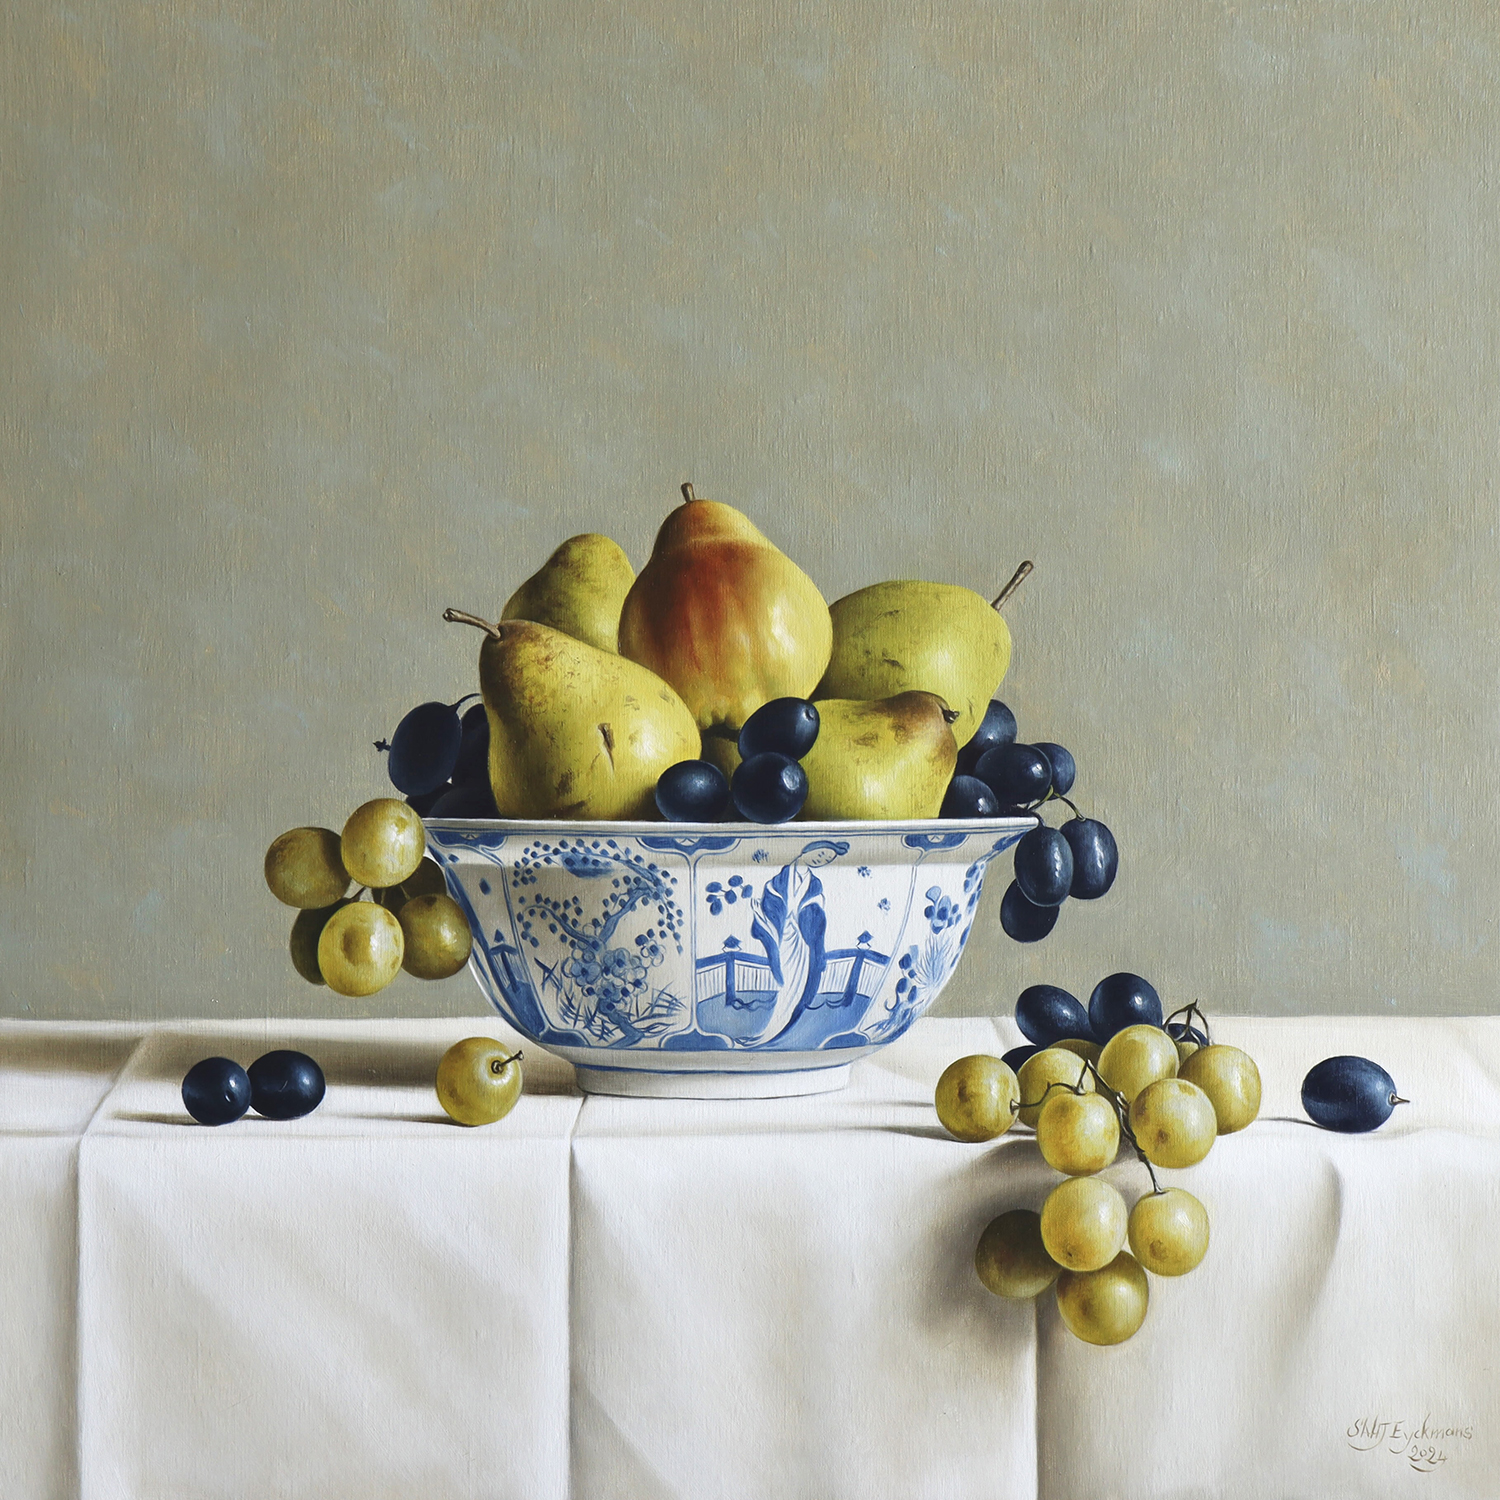 "Grapes and pears in Ming"